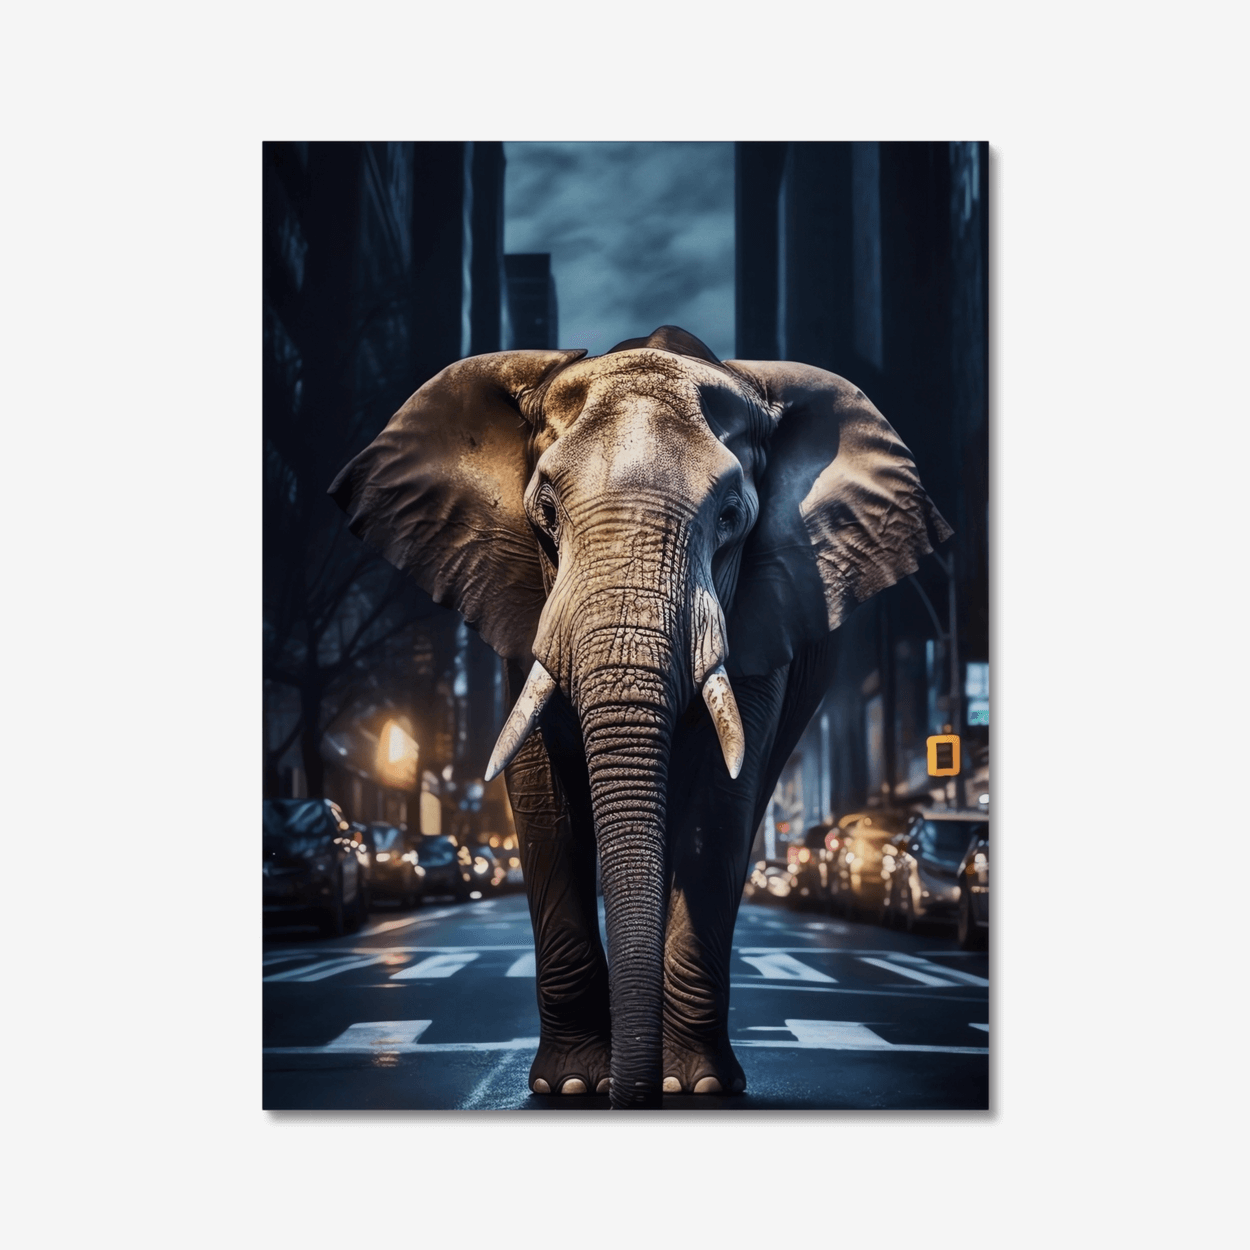 An Elephant in the City